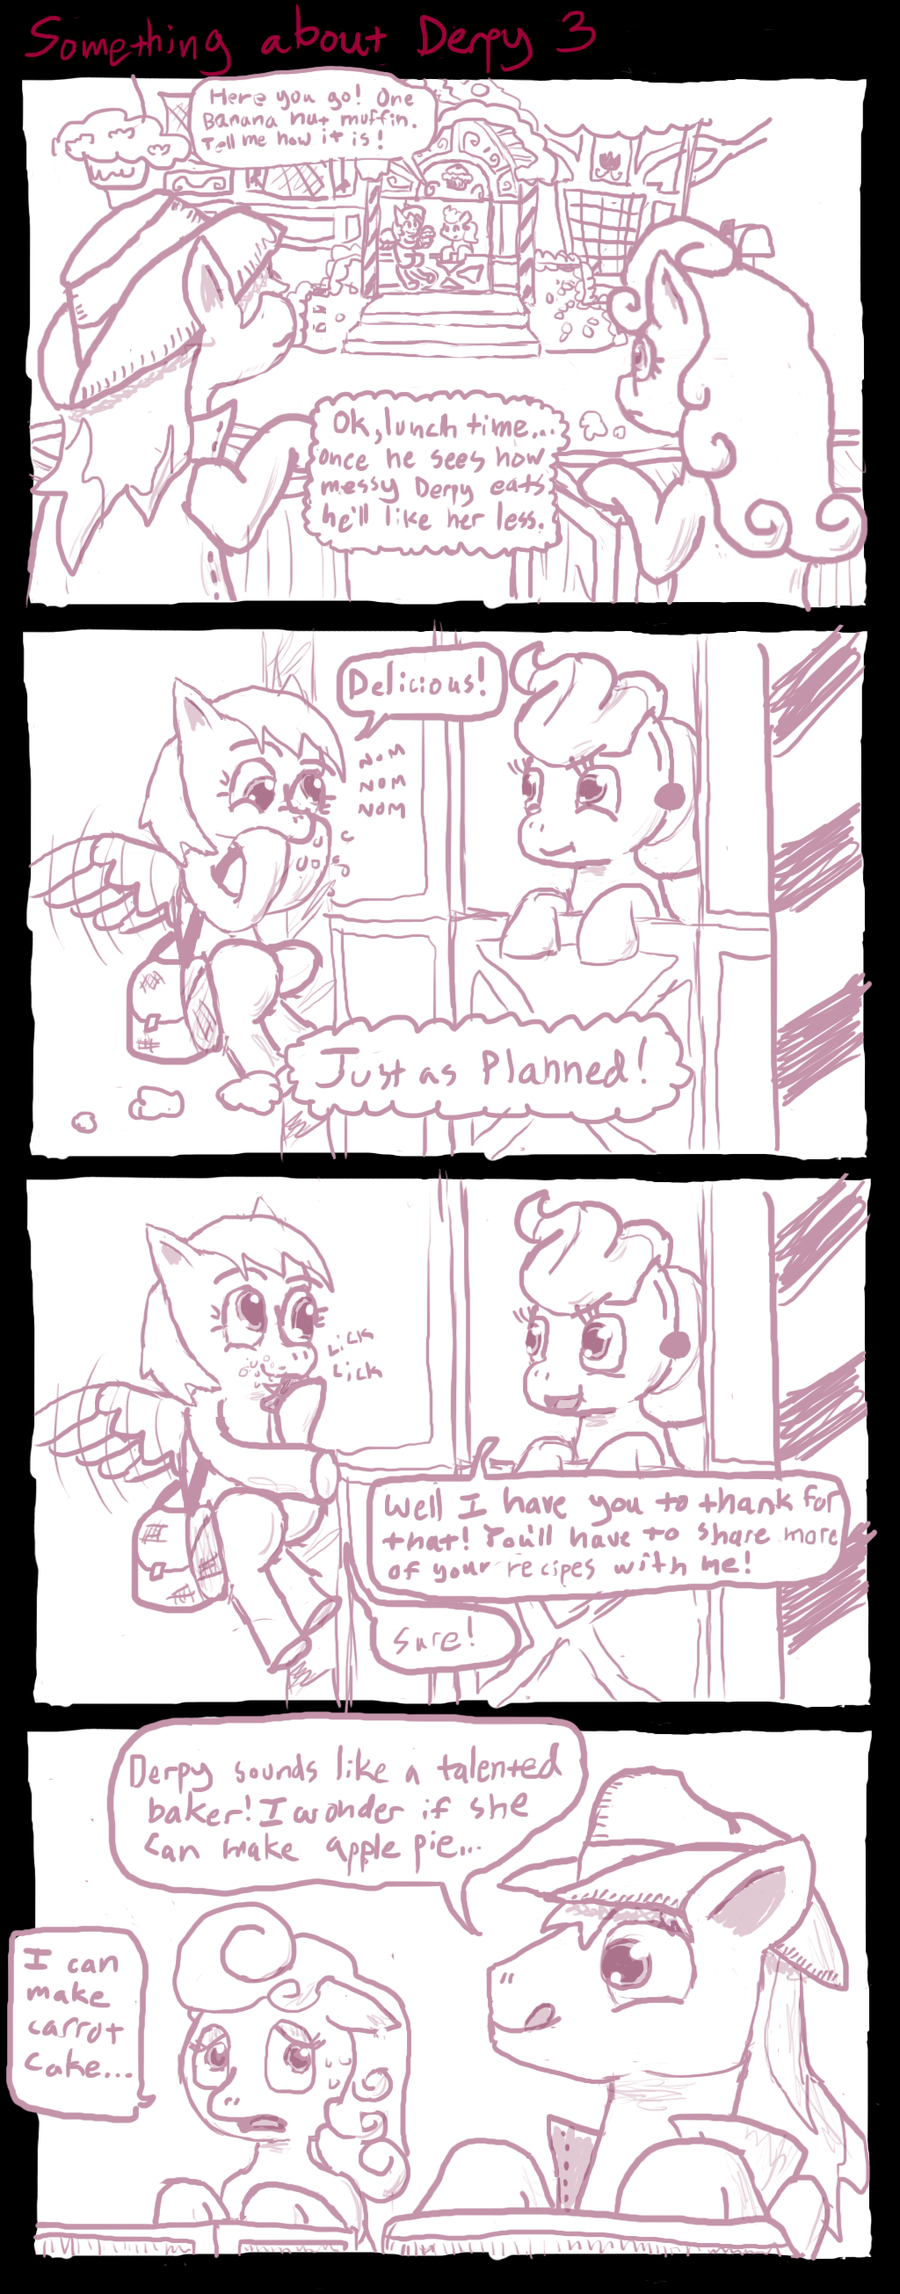 something_about_derpy_3_by_ficficponyfic-d4d9xtj.png